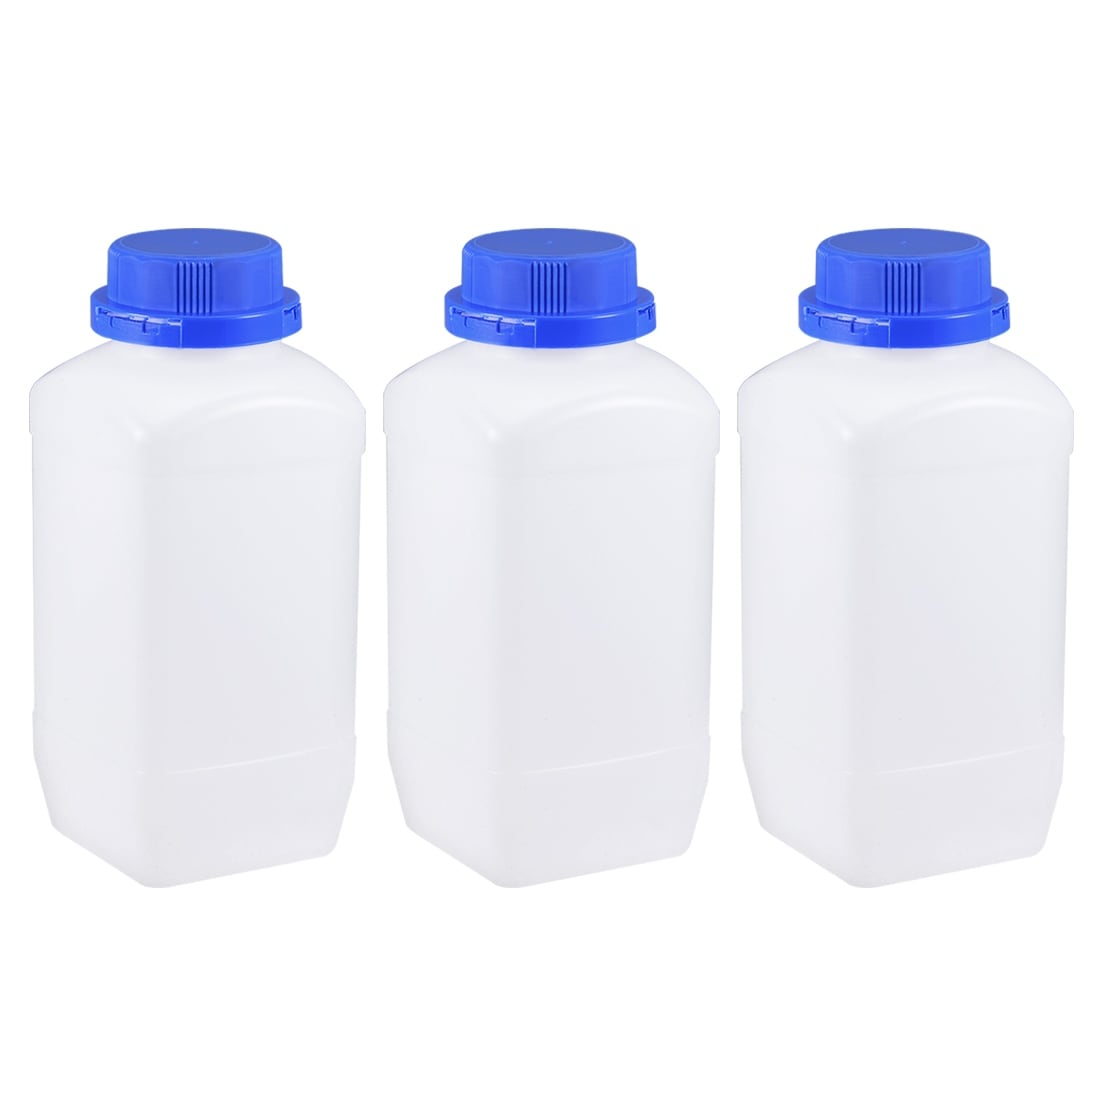 https://ak1.ostkcdn.com/images/products/is/images/direct/ddc4dc5d7670f5a4f5408fd6520312e86524db20/Plastic-Lab-Reagent-Bottle-1500ml-Sample-Sealing-Liquid-Storage-Container-3pcs.jpg